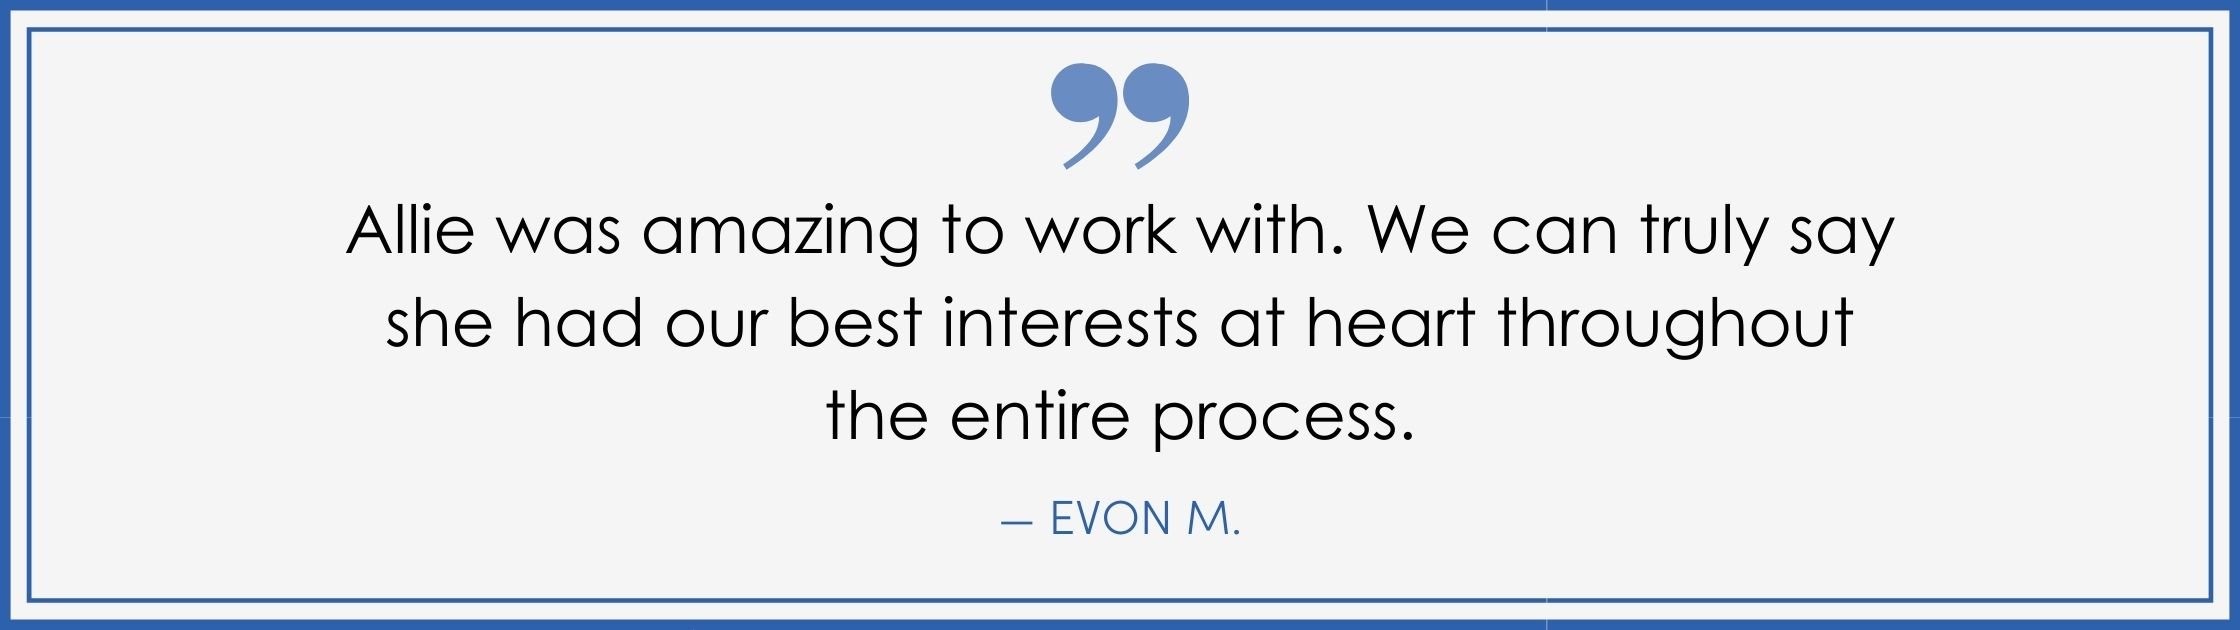 “Allie was amazing to work with. We can truly say she had our best interests at heart throughout the entire process.” –Evon M. (Copy) (Copy)